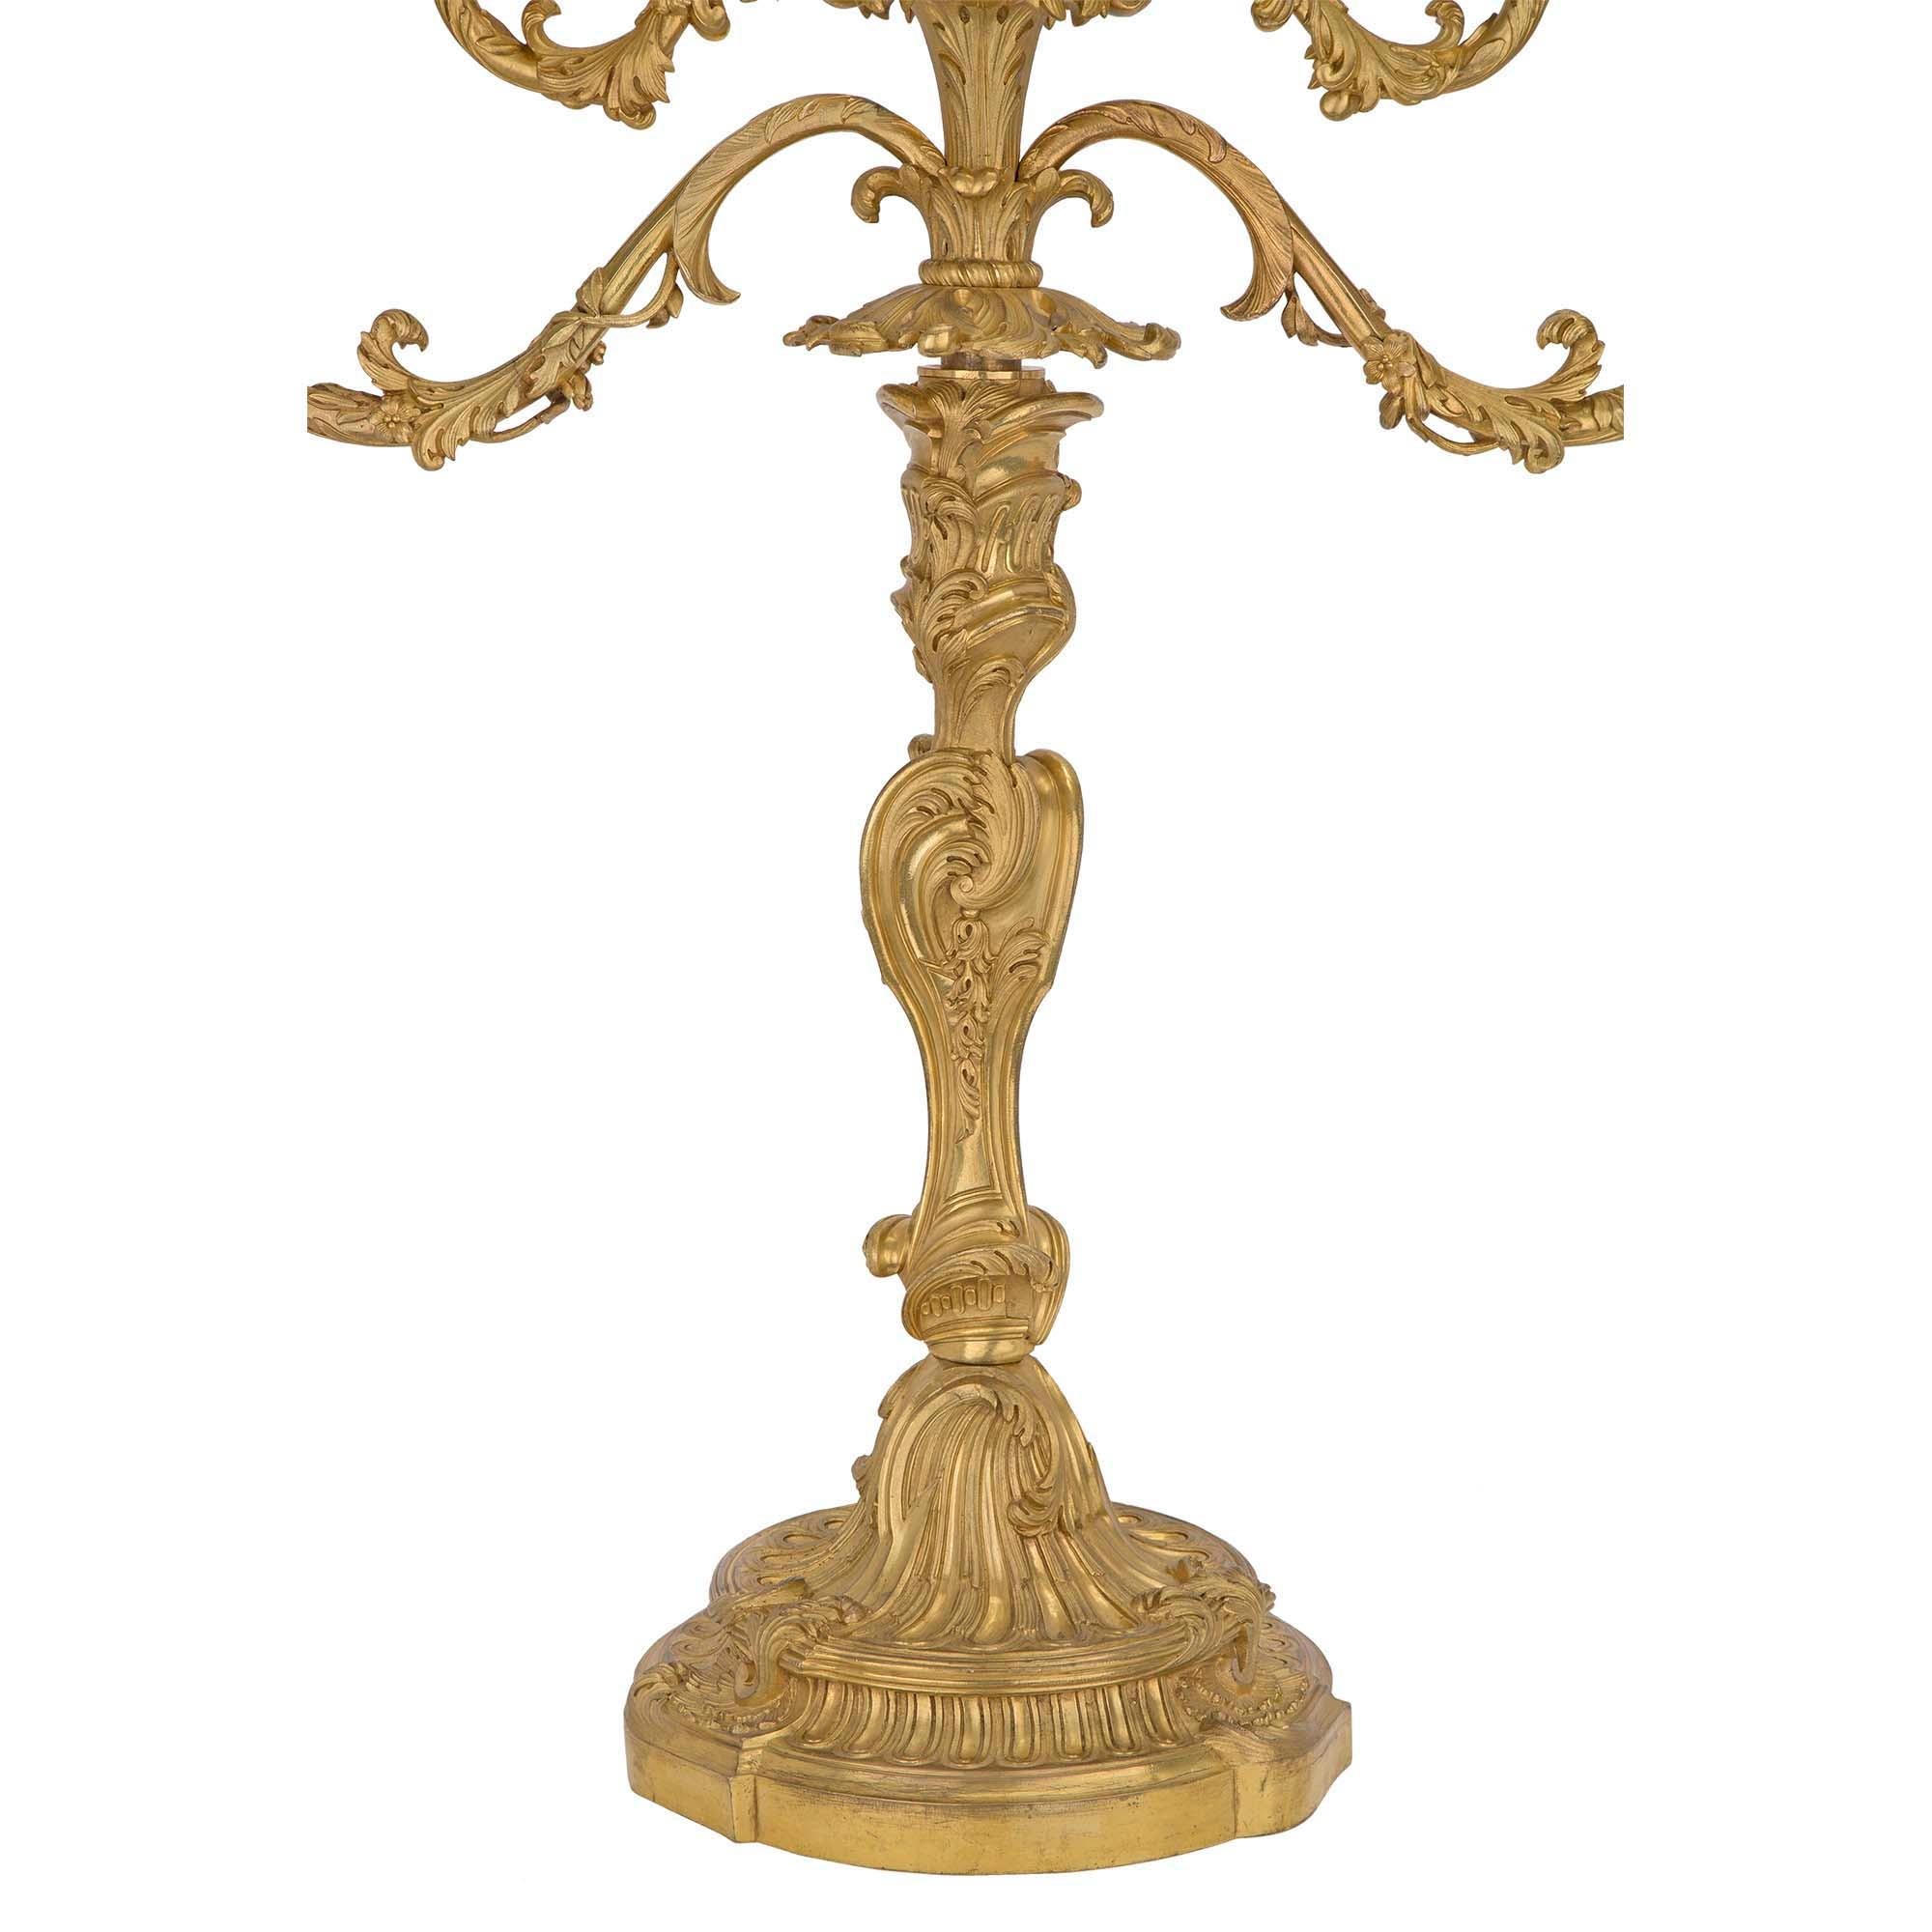 Pair of French Early 18th Century Régence Period Ormolu Candelabras For Sale 3